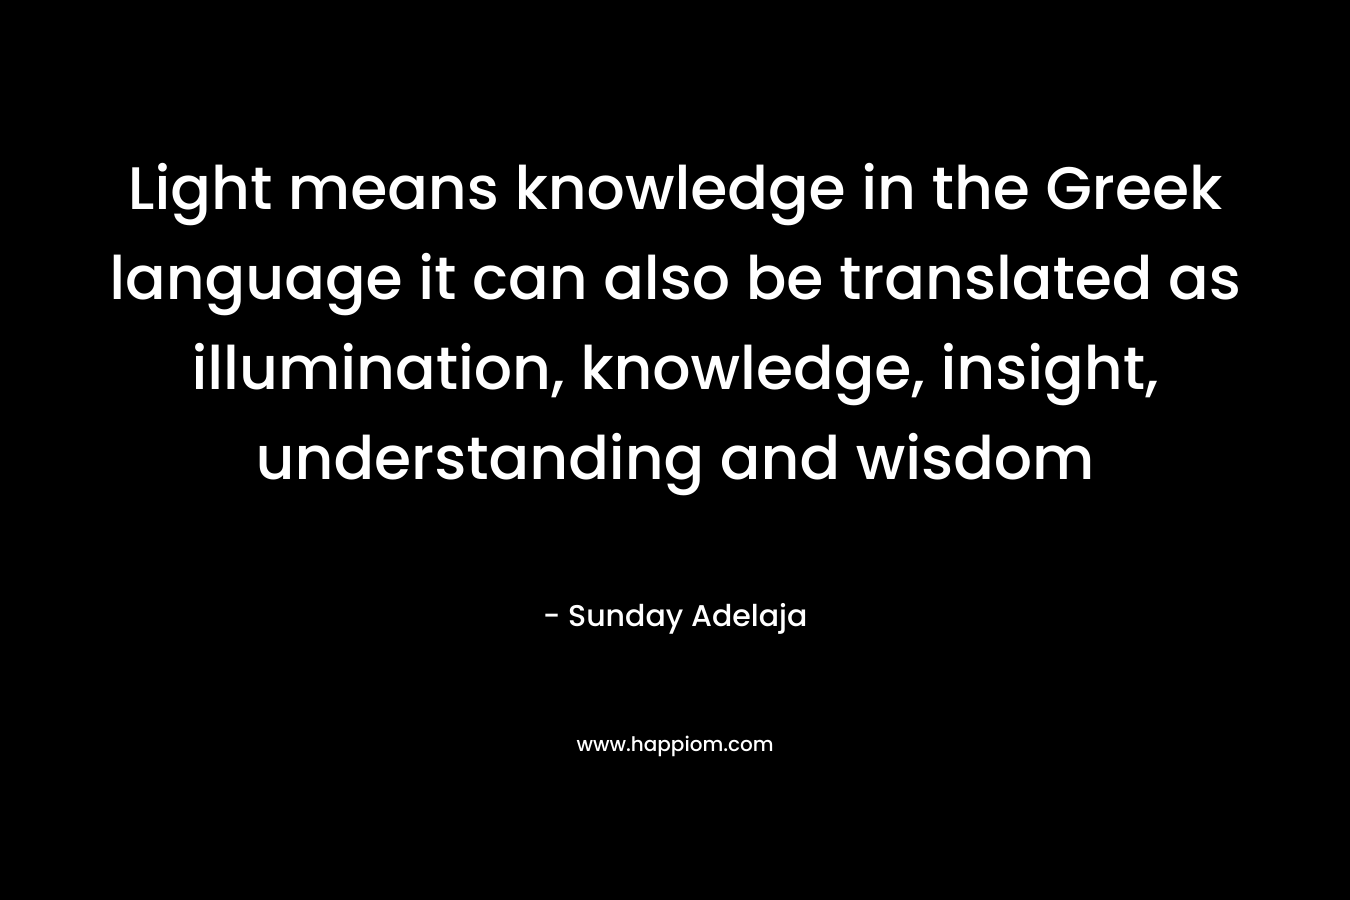 Light means knowledge in the Greek language it can also be translated as illumination, knowledge, insight, understanding and wisdom